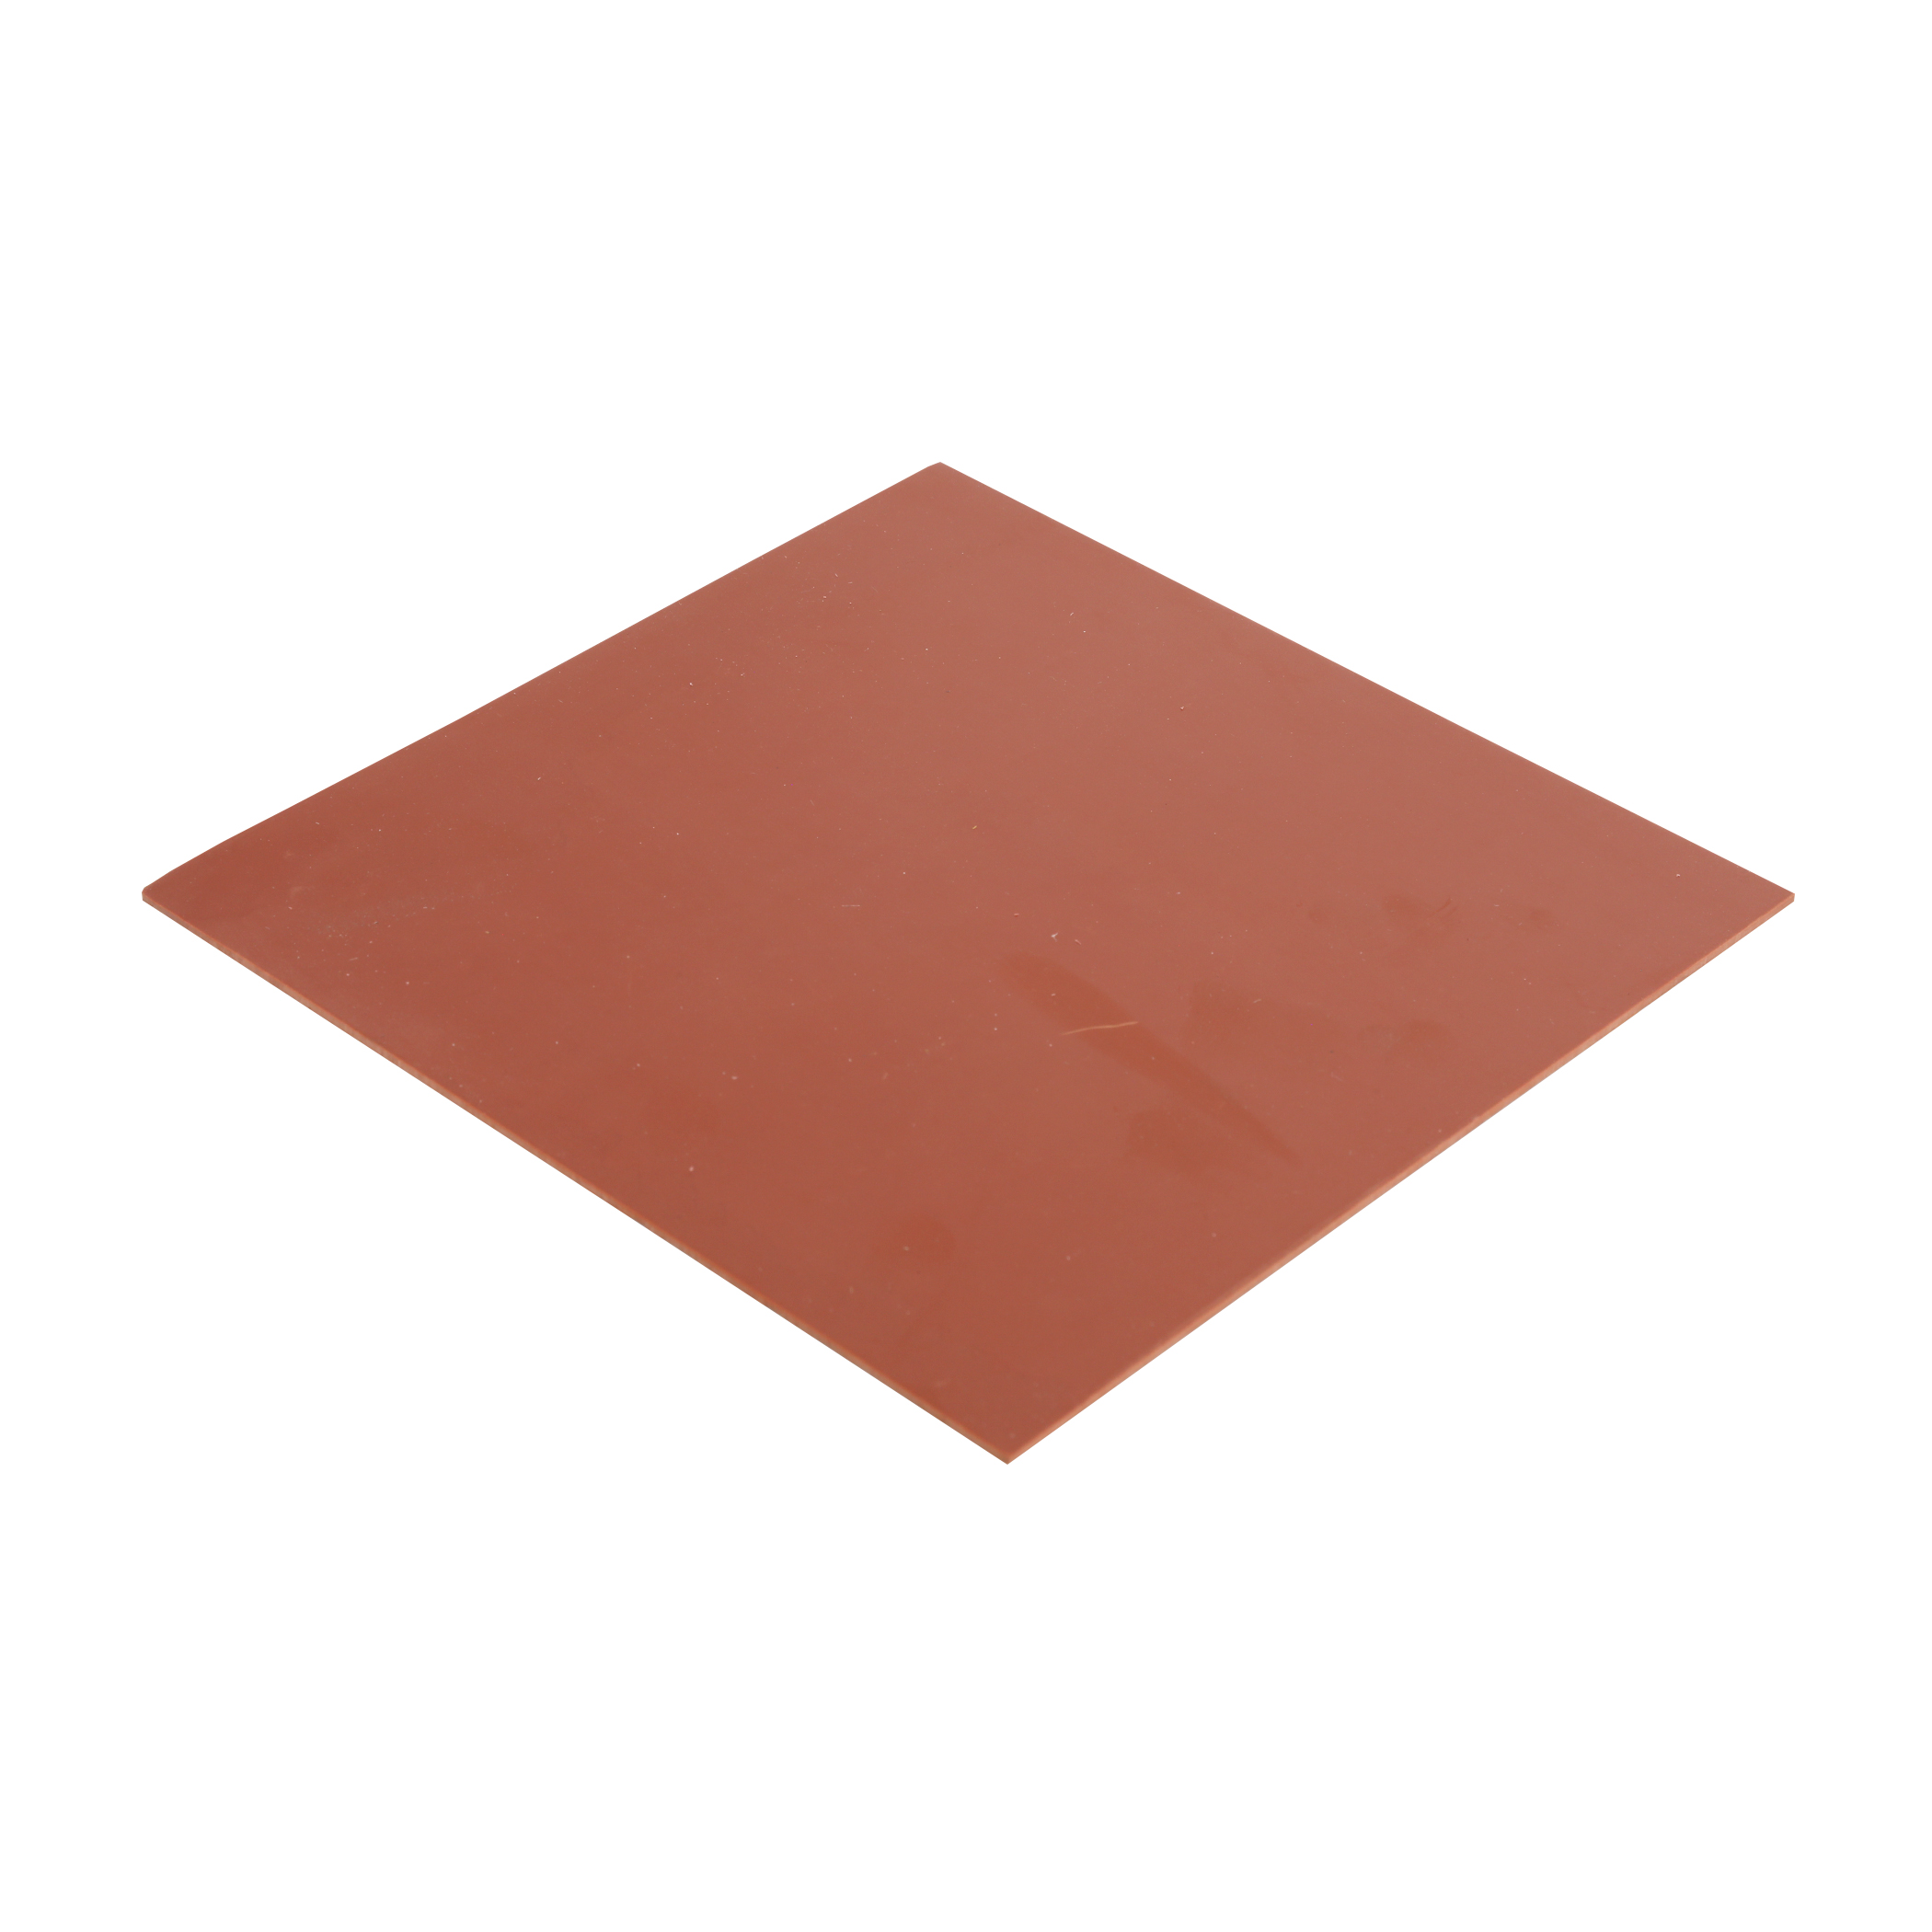 6 in. x 6 in. x 1/16 in. Rubber Sheet Packing